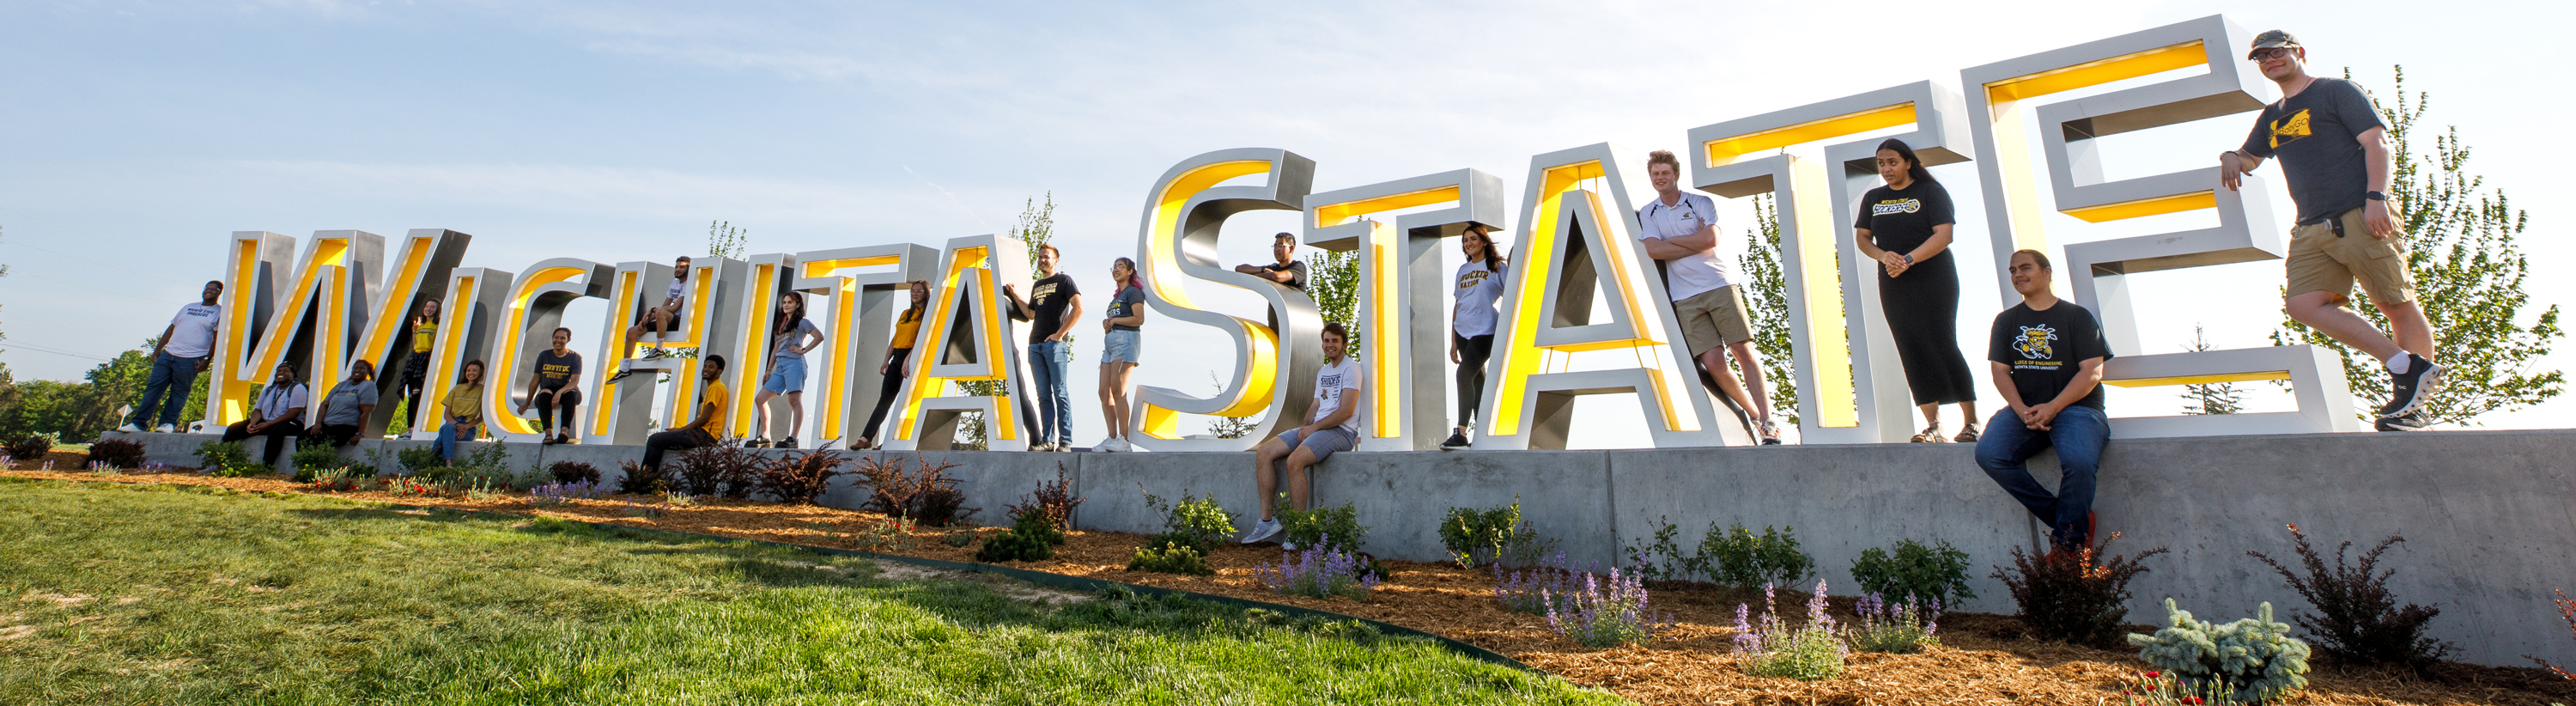 Shocker Students on the Wichita State Sign